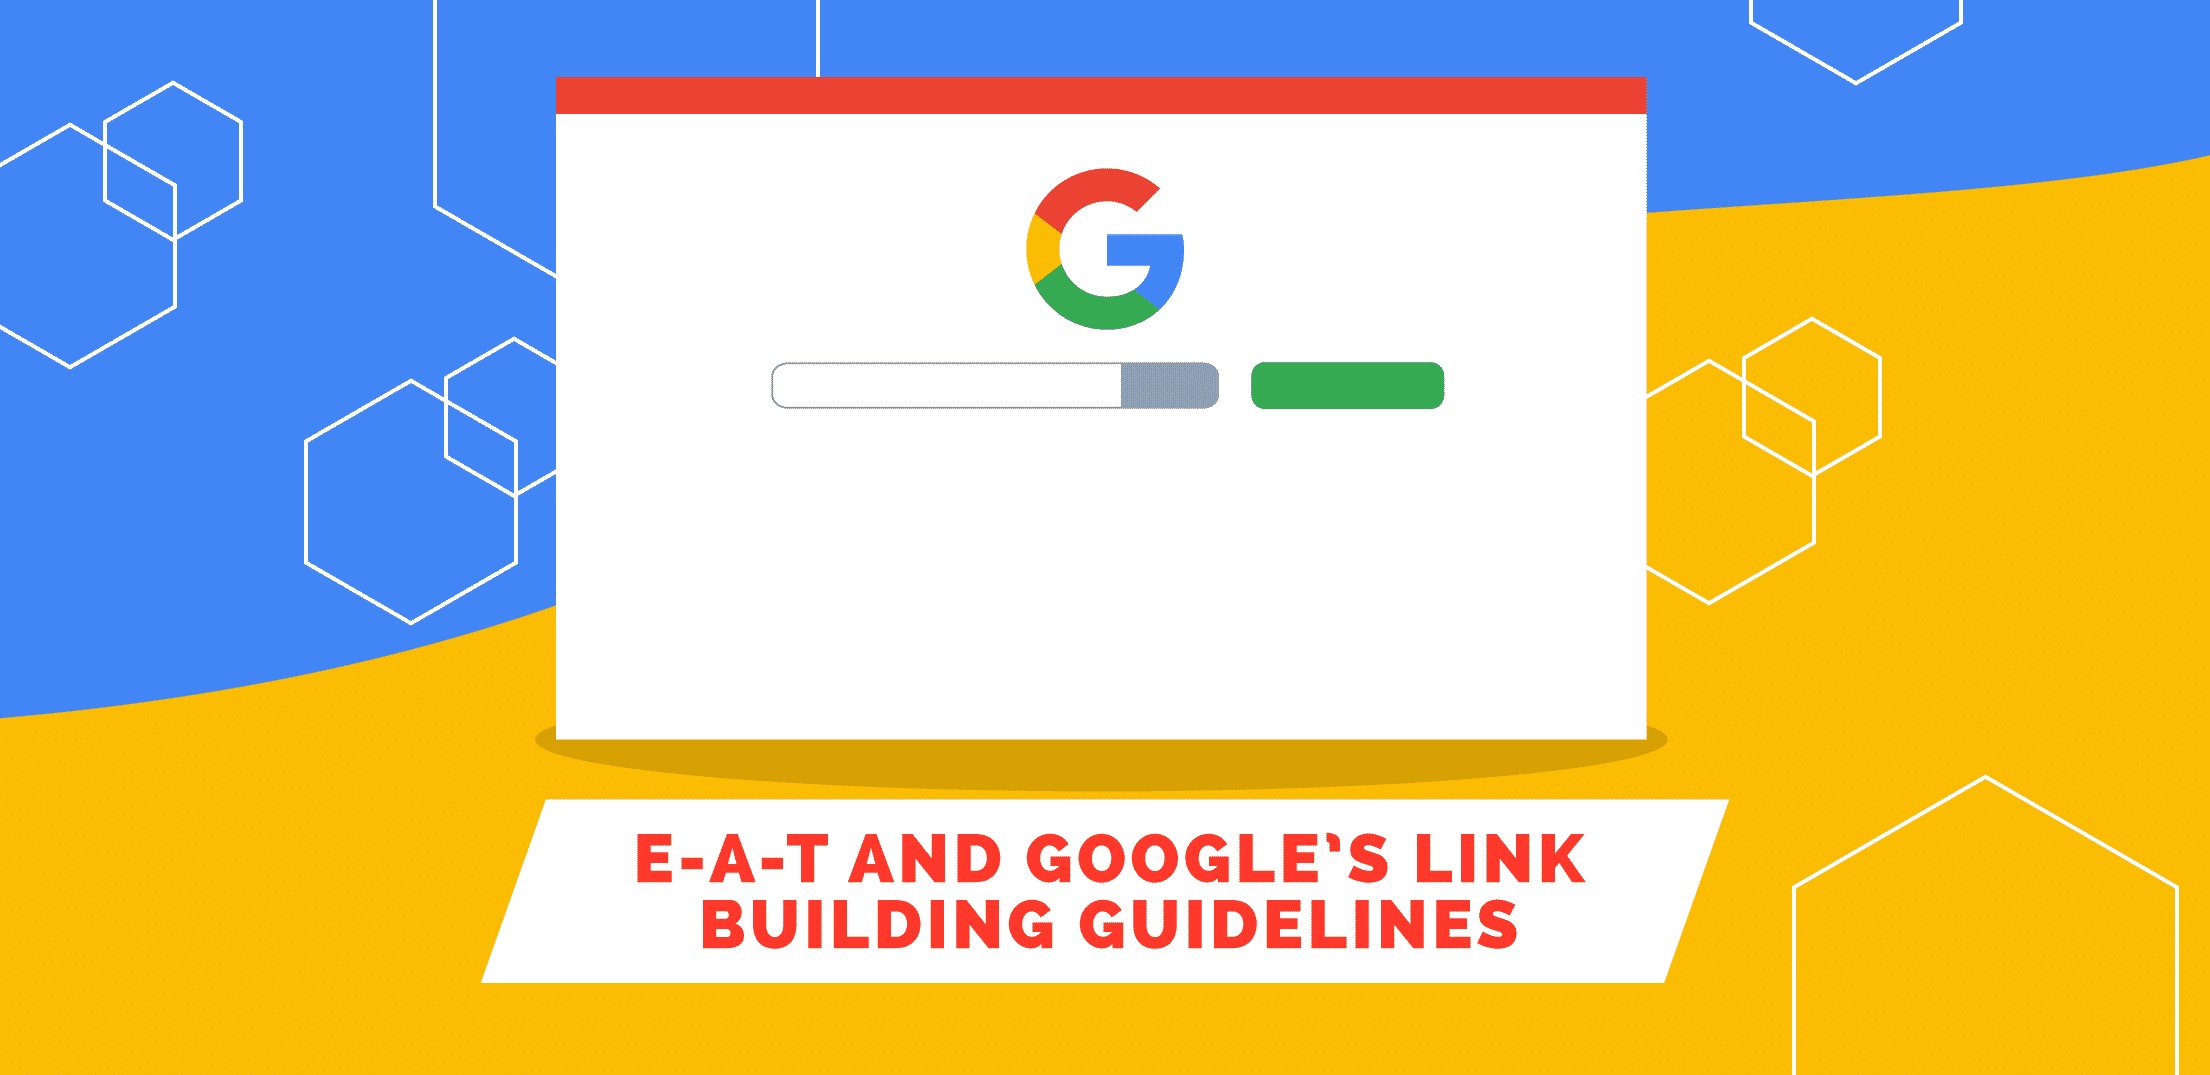 E-A-T and Google's link building guidelines